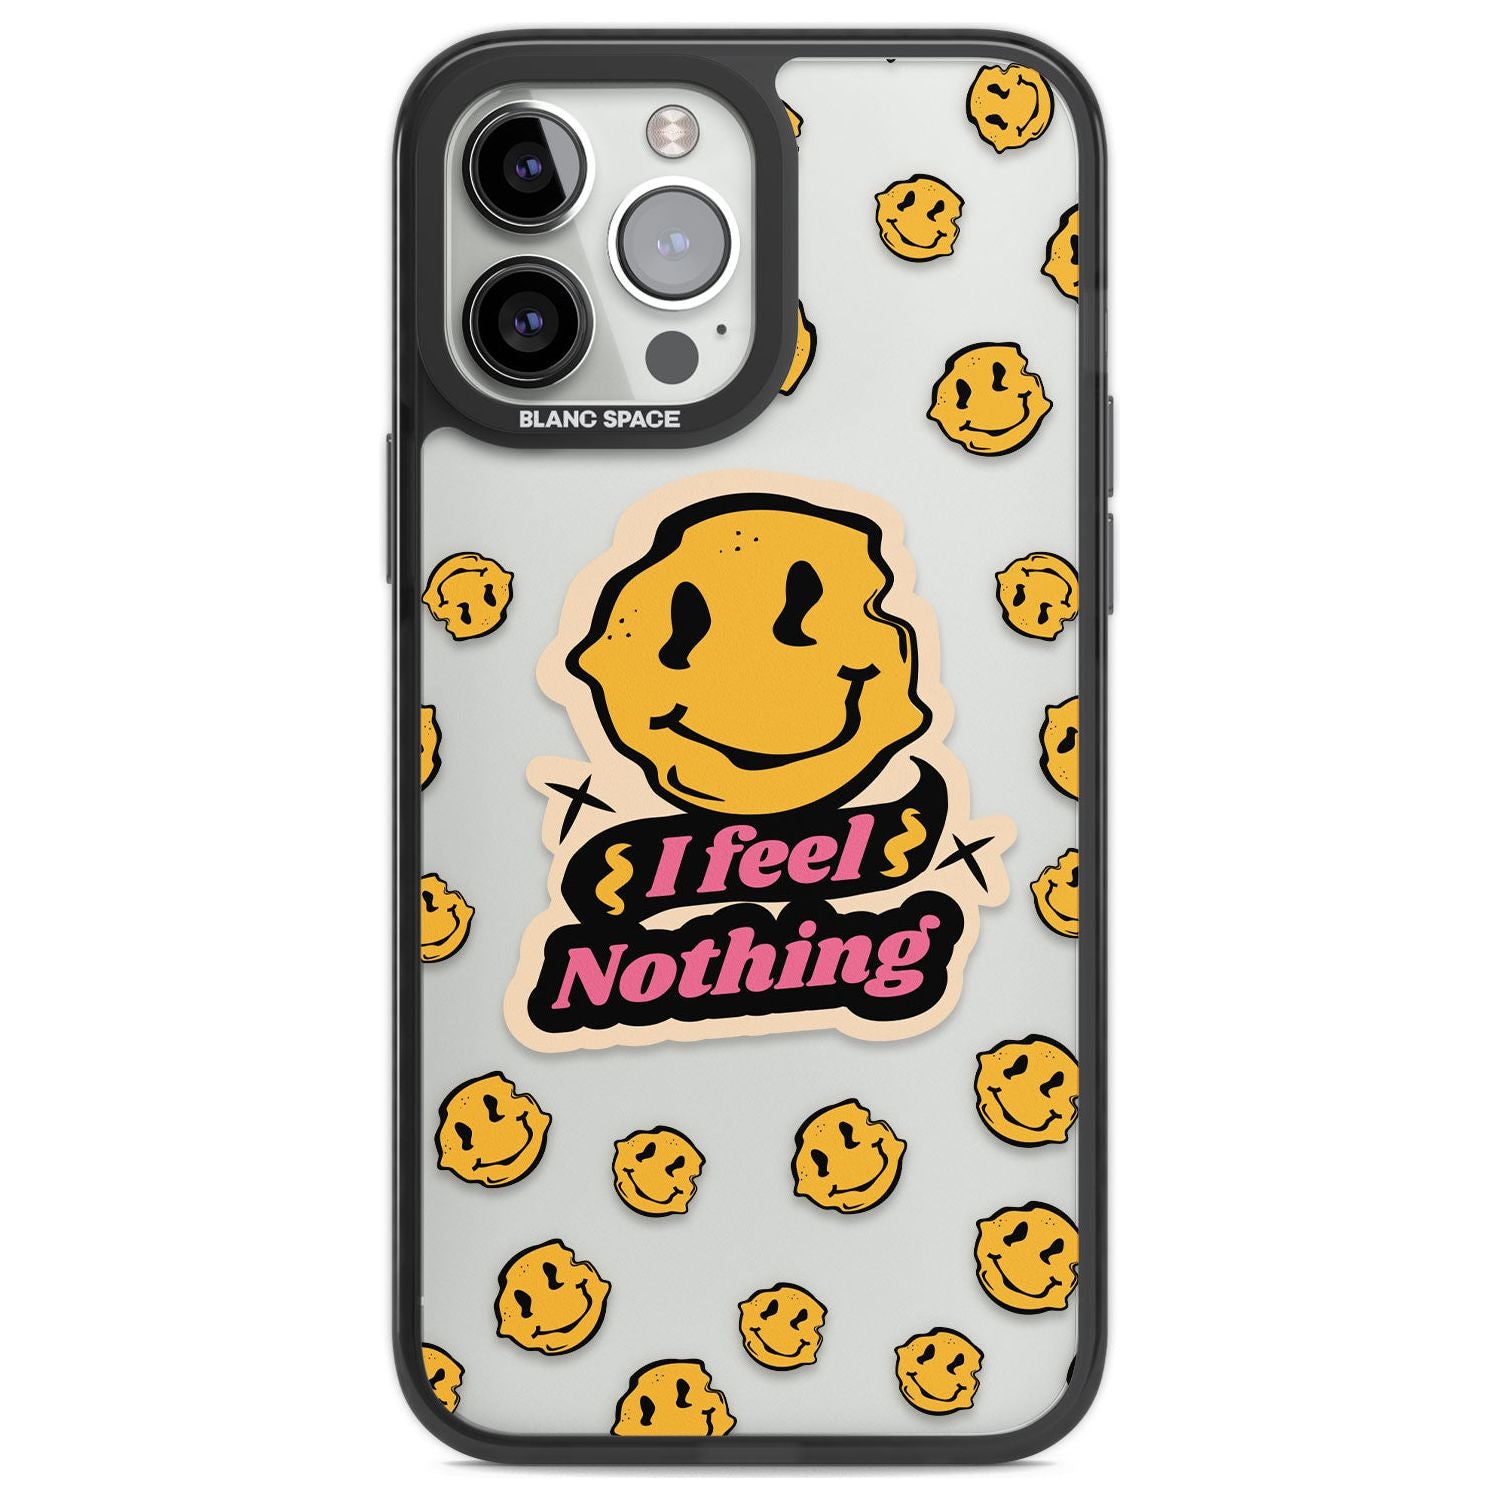 I feel nothing (Clear) Phone Case iPhone 13 Pro Max / Black Impact Case,iPhone 14 Pro Max / Black Impact Case Blanc Space